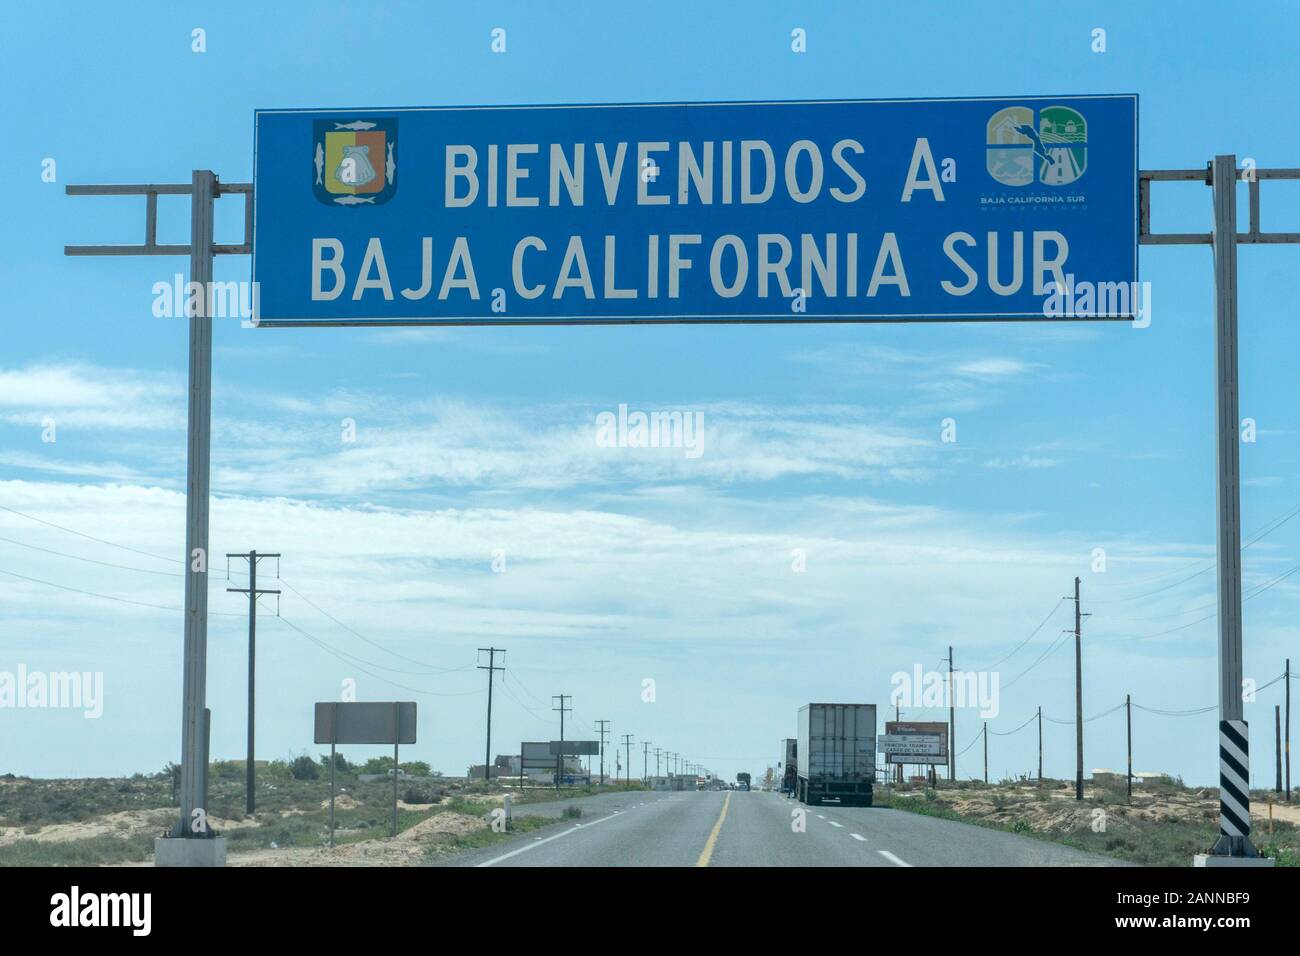 welcome to baja california sur road sign detail Stock Photo